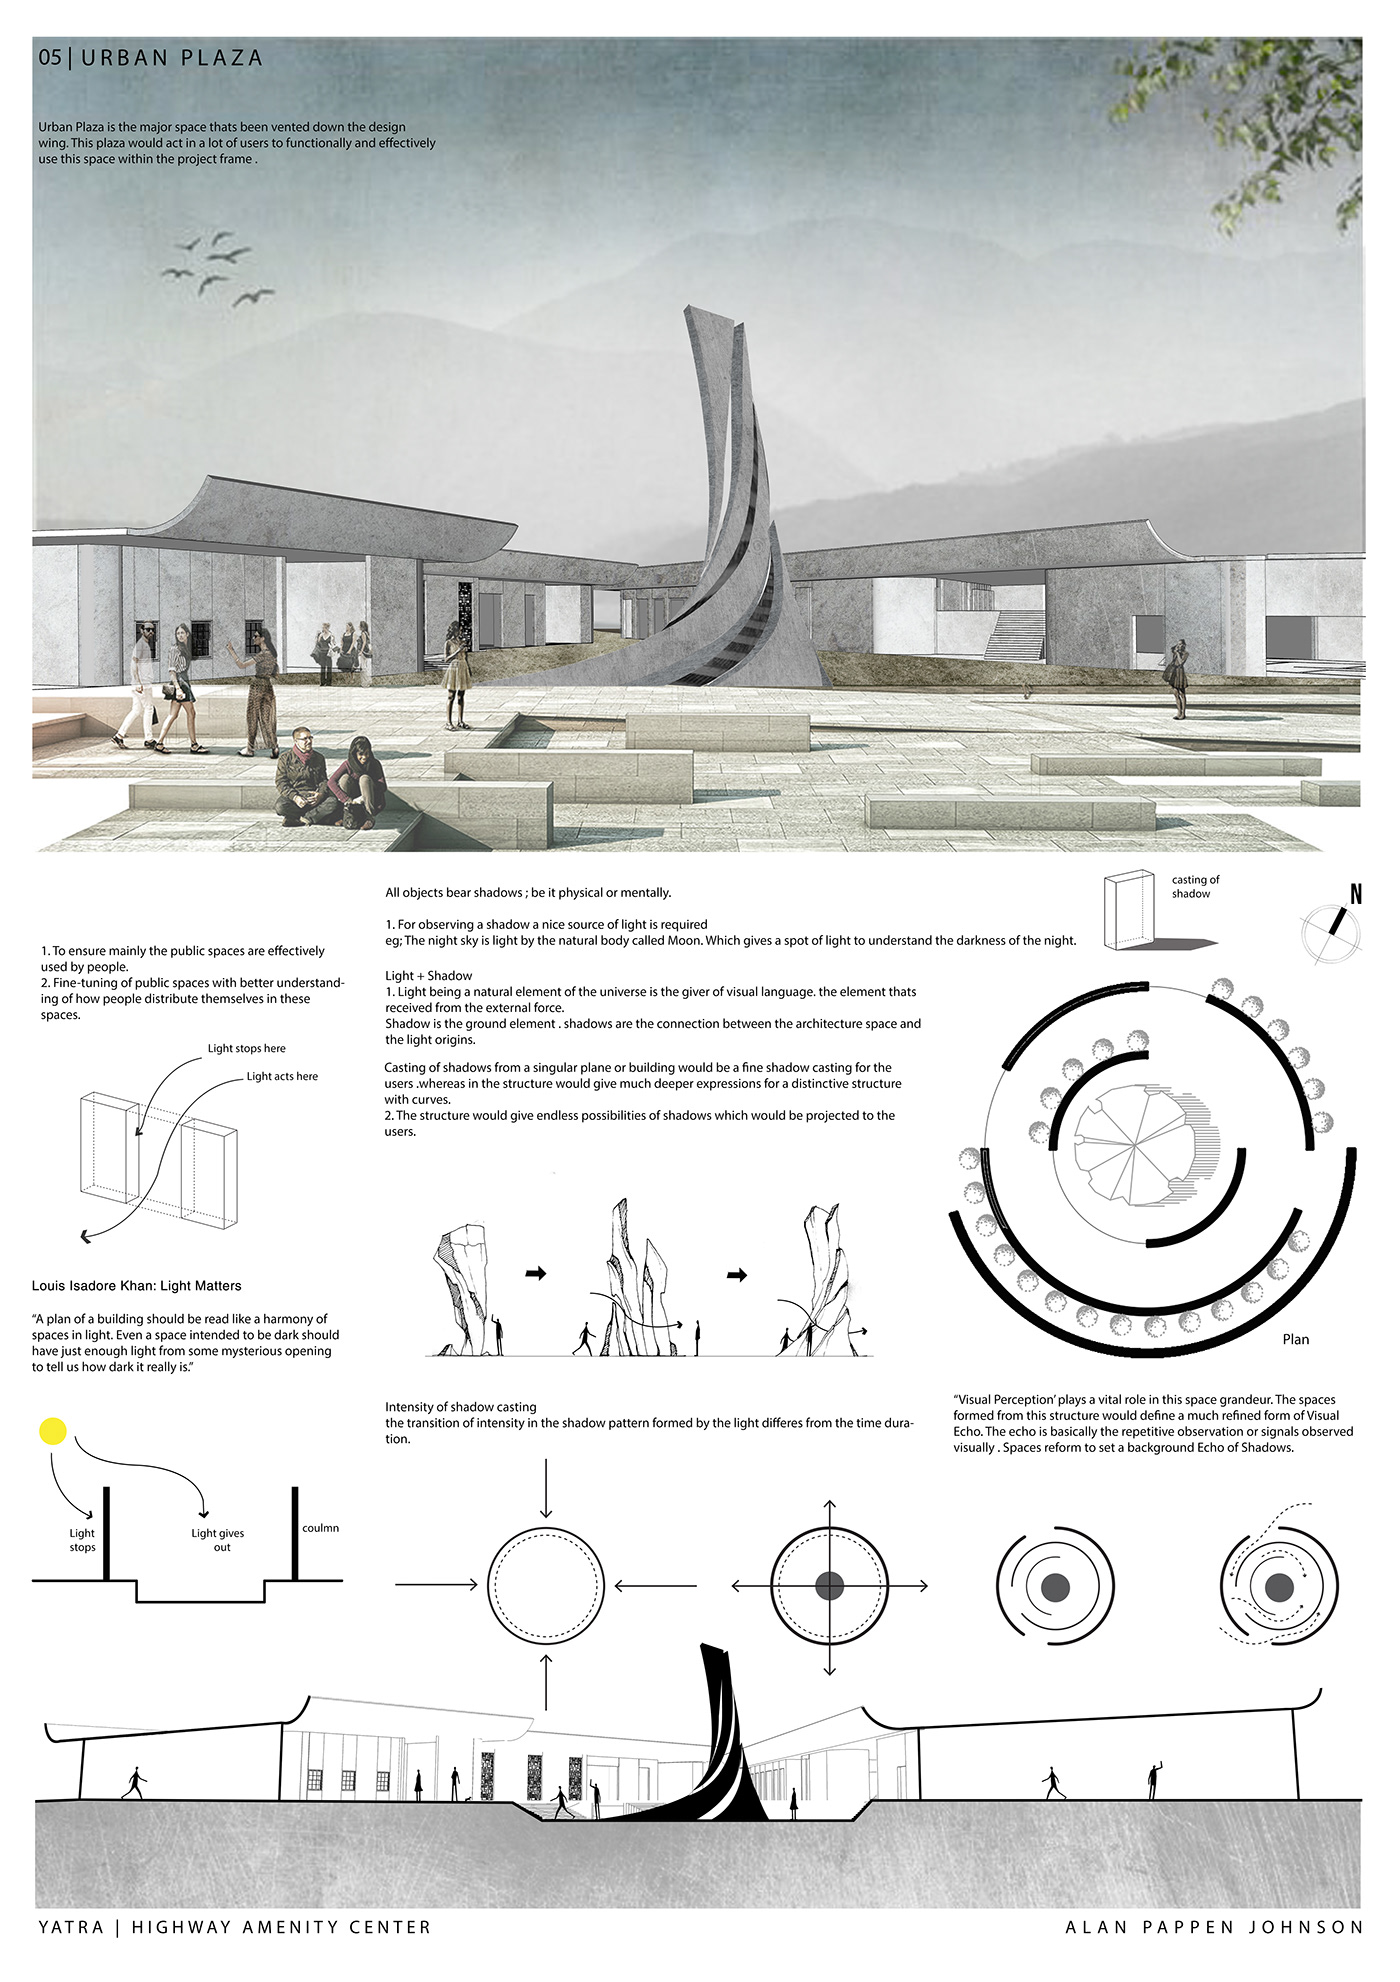 architecture Commerical designs digitalart grey illustrations Project rendering textures Urban